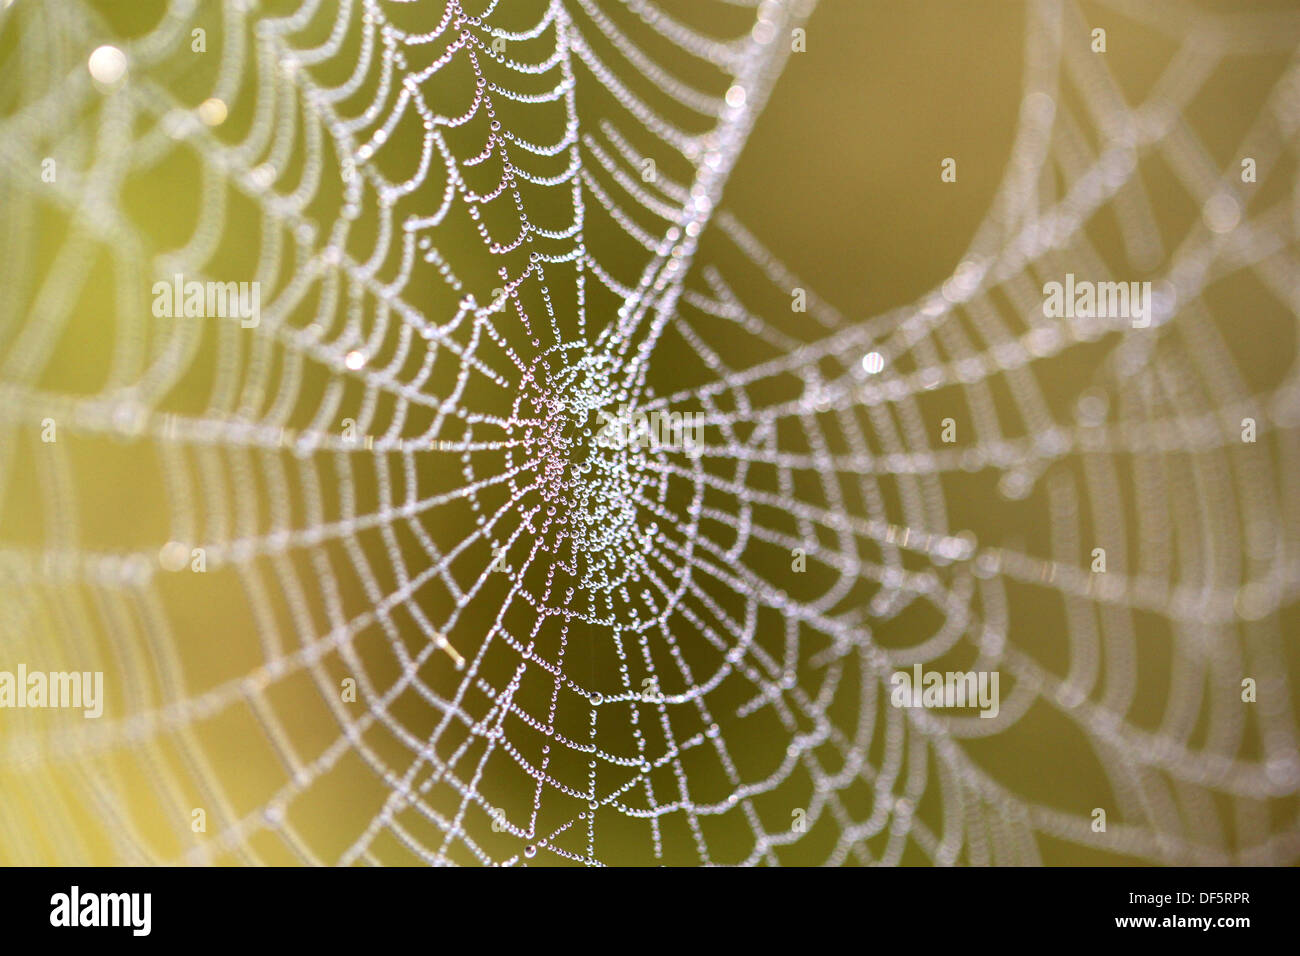 Spider web with drops Stock Photo